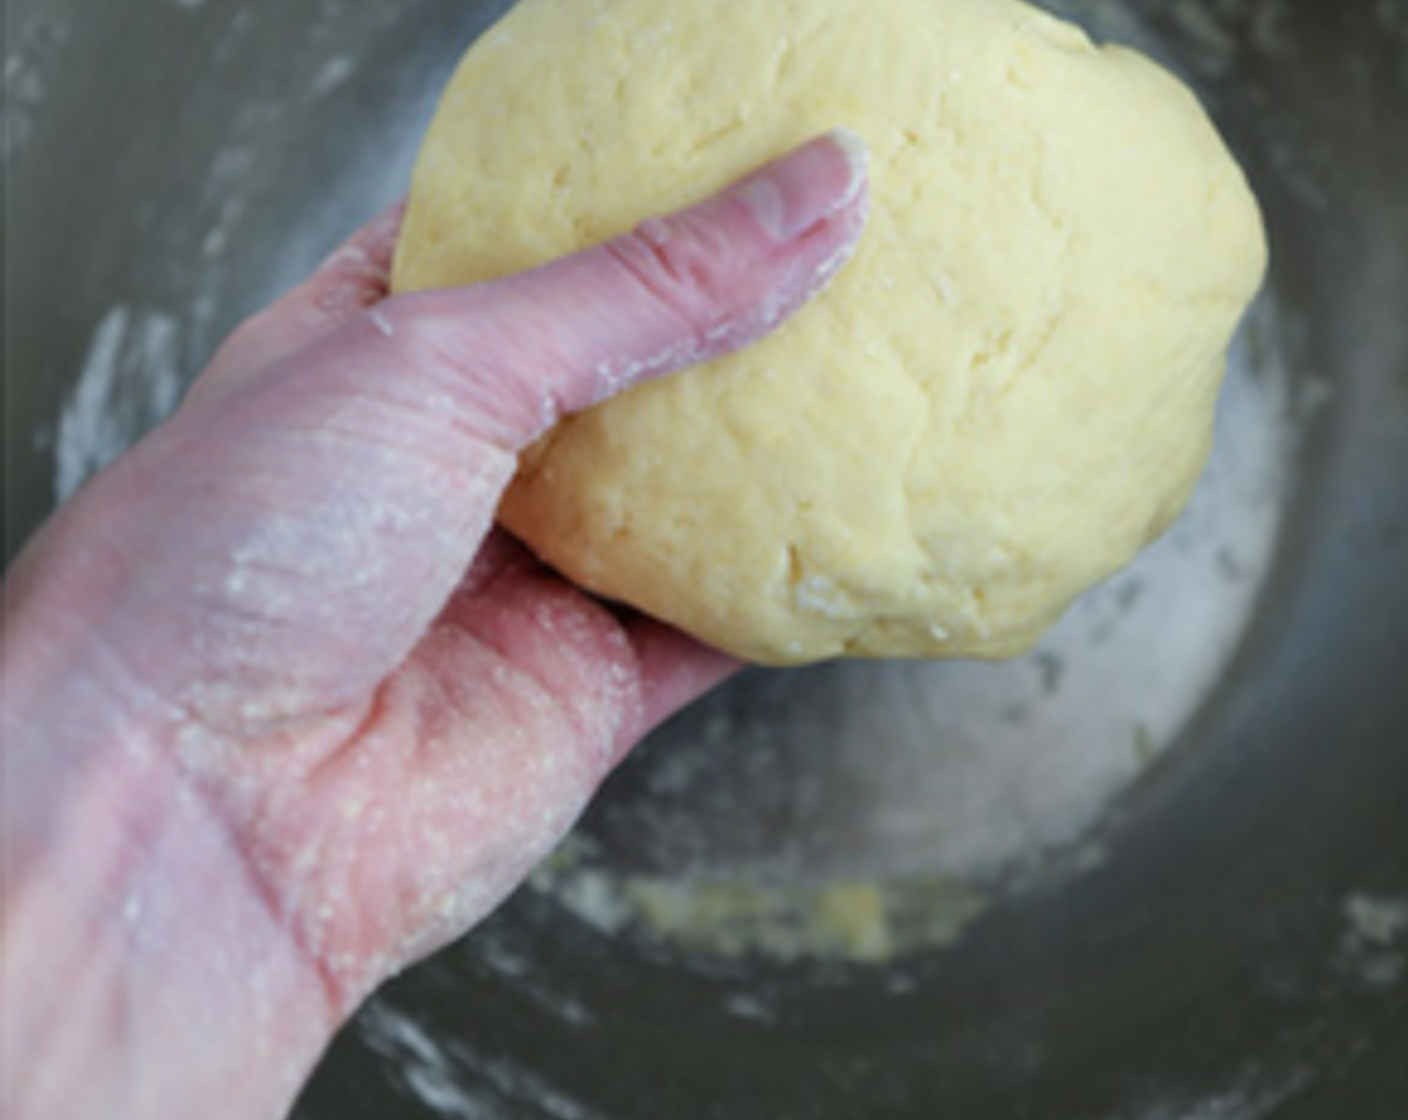 step 2 With clean hands, knead the dough in the bowl, pushing down and folding the patty back on itself until you have a ball that is more or less smooth in texture.